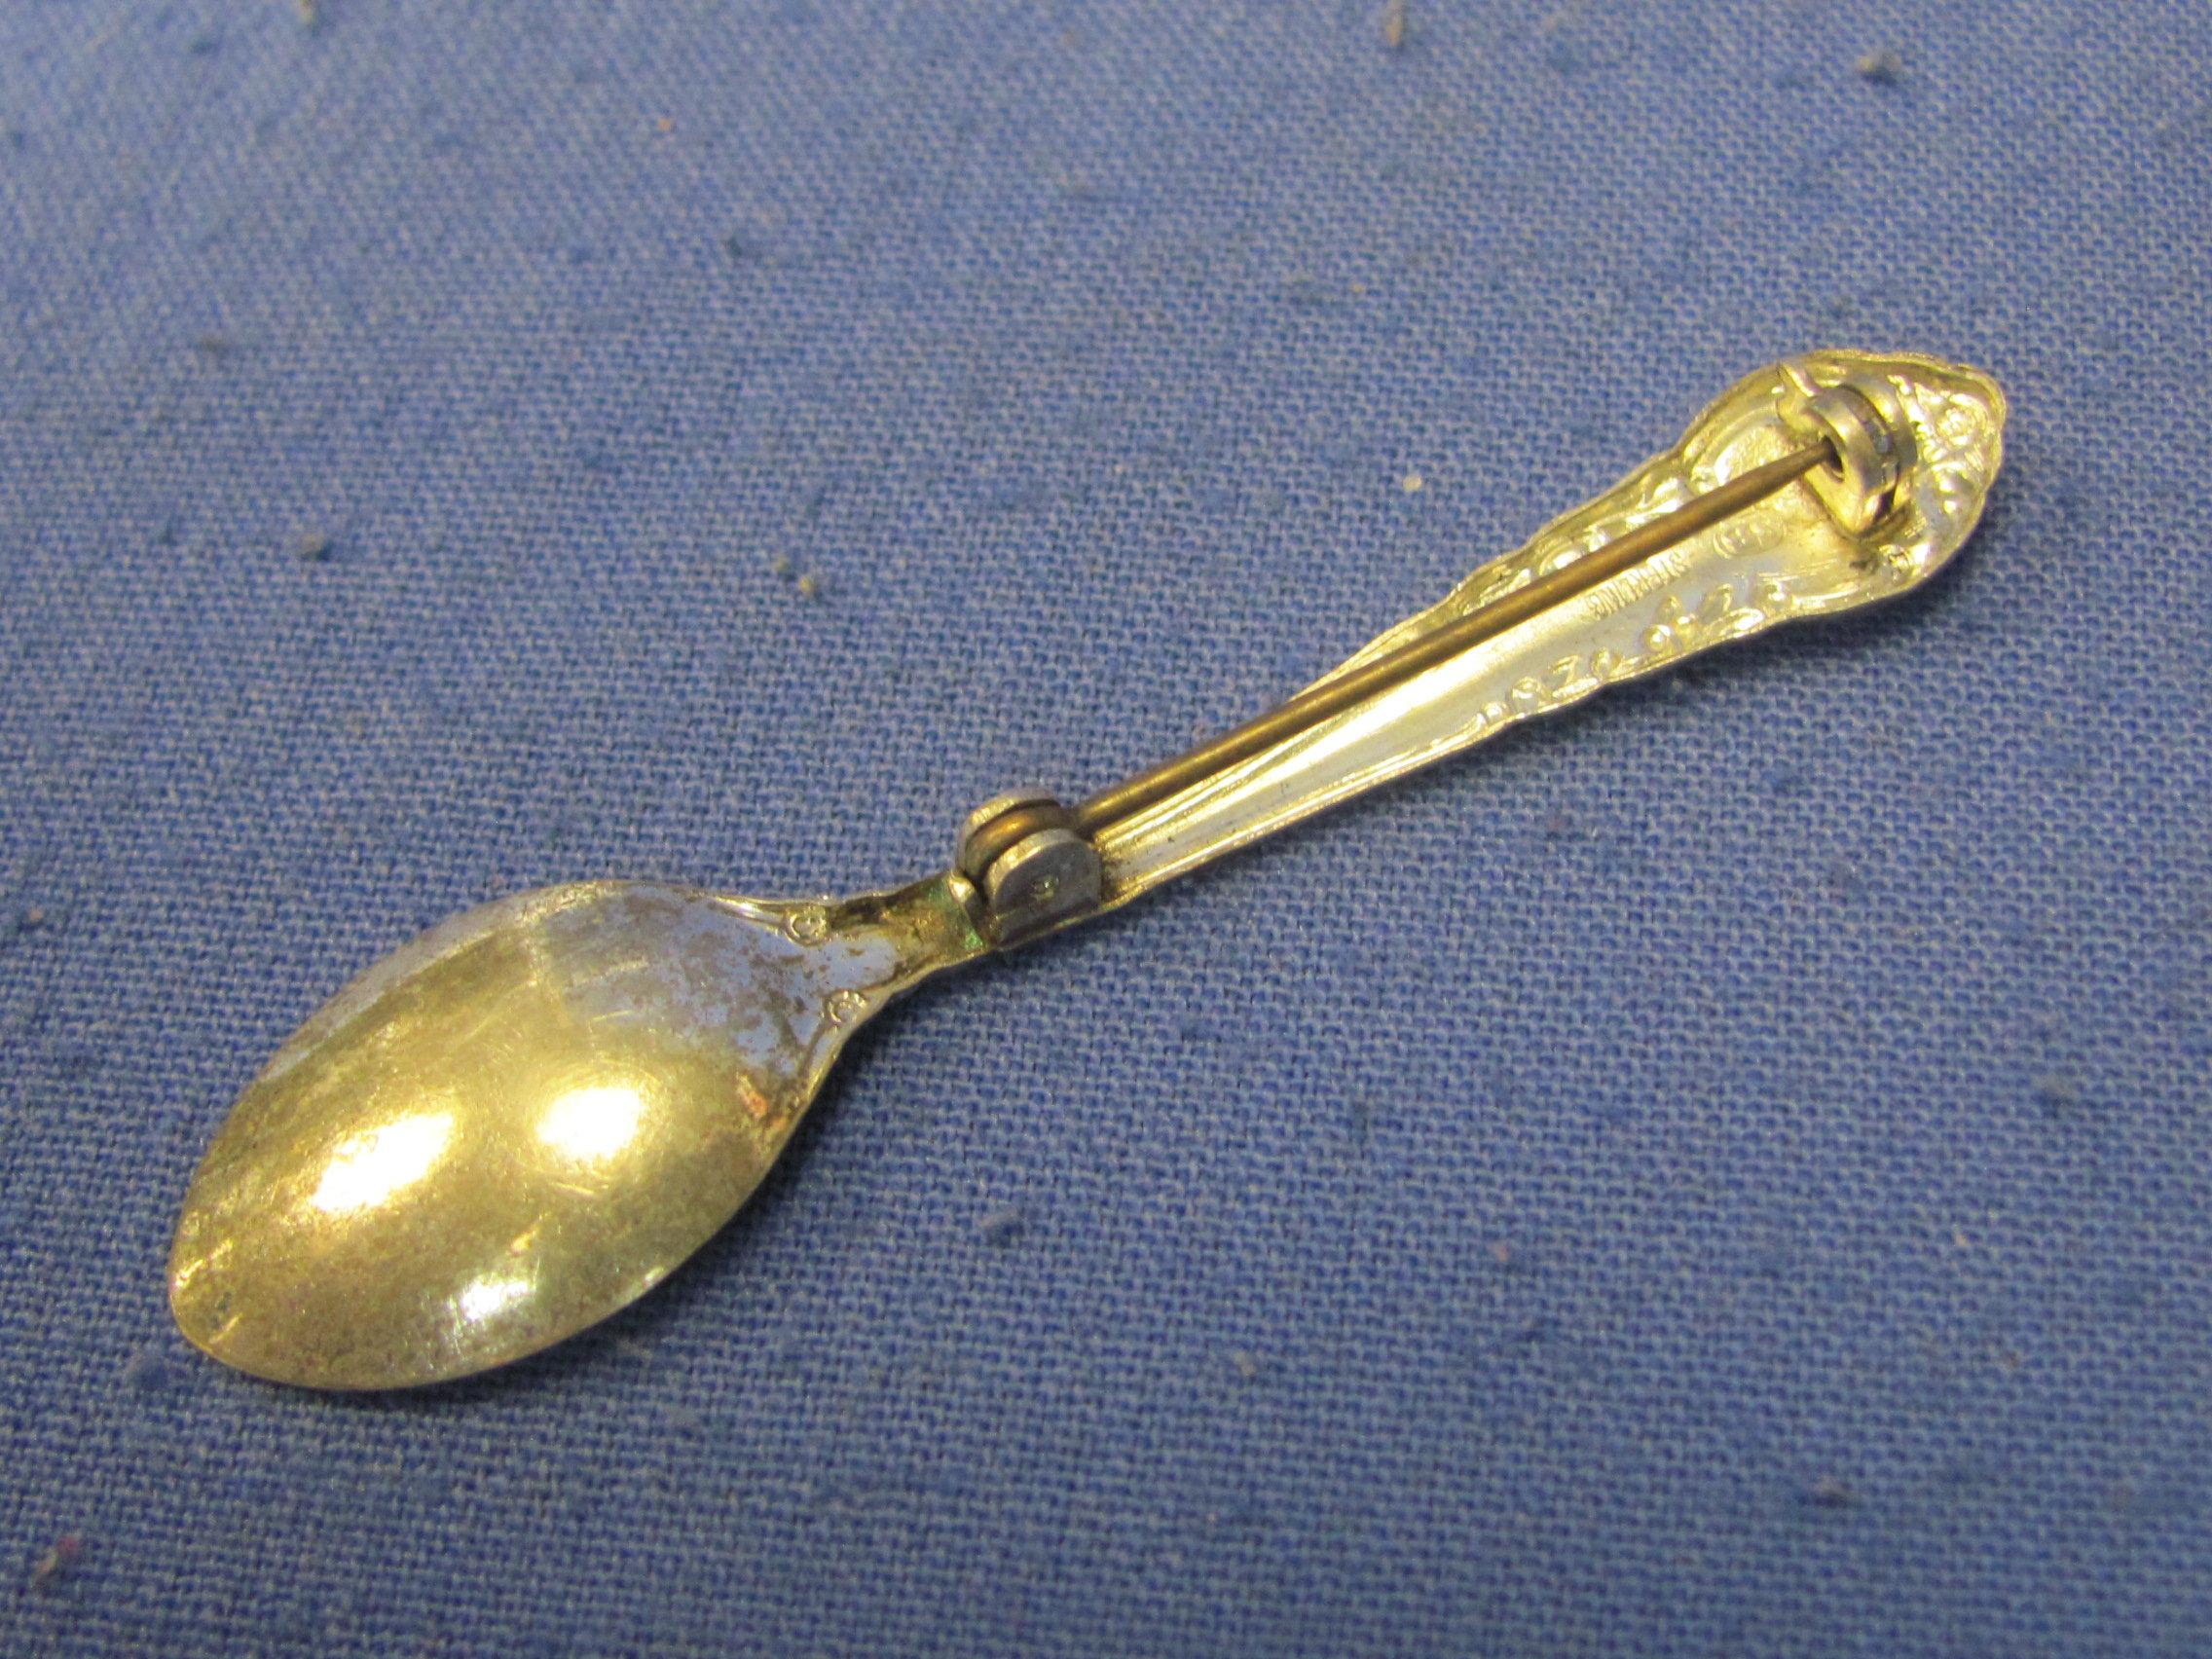 3 Vintage Sterling Silver Spoon Pins/Brooches – 2 5/8” long – Total weight is 11.4 grams